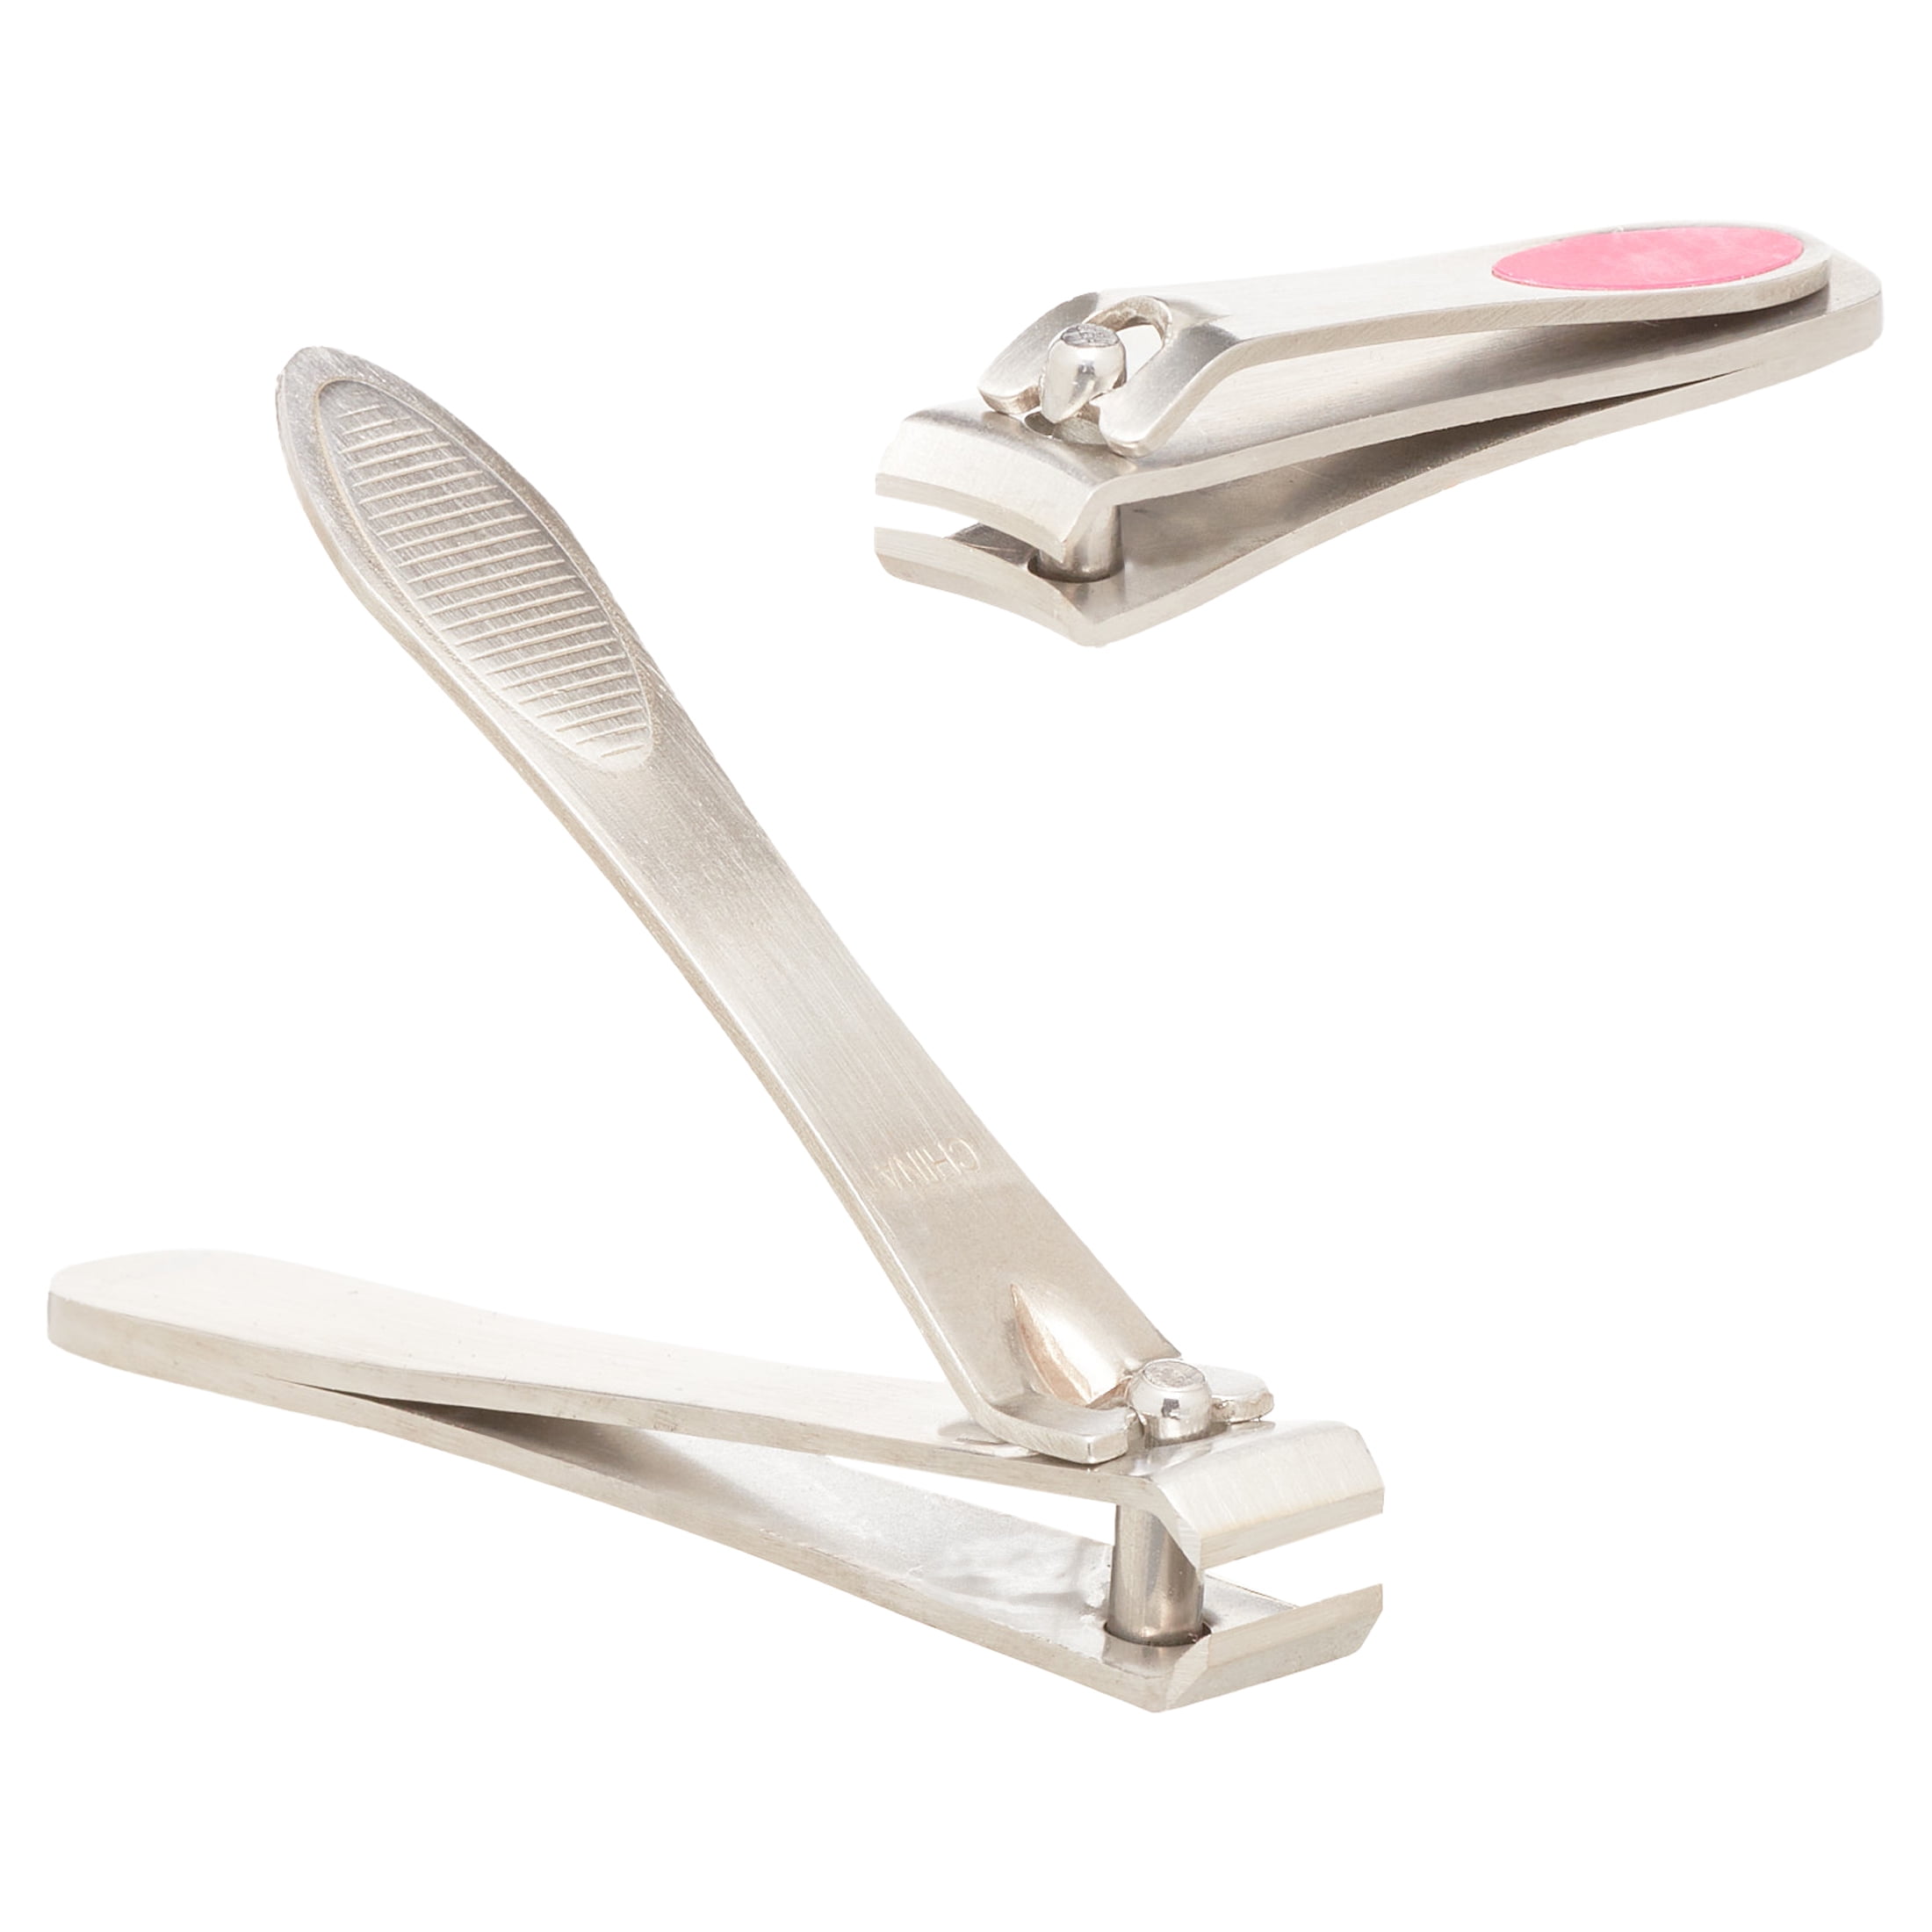 KAI Convex-blade Nipper Claw Clippers for Ingrown Toenails Shipping from  Japan | eBay